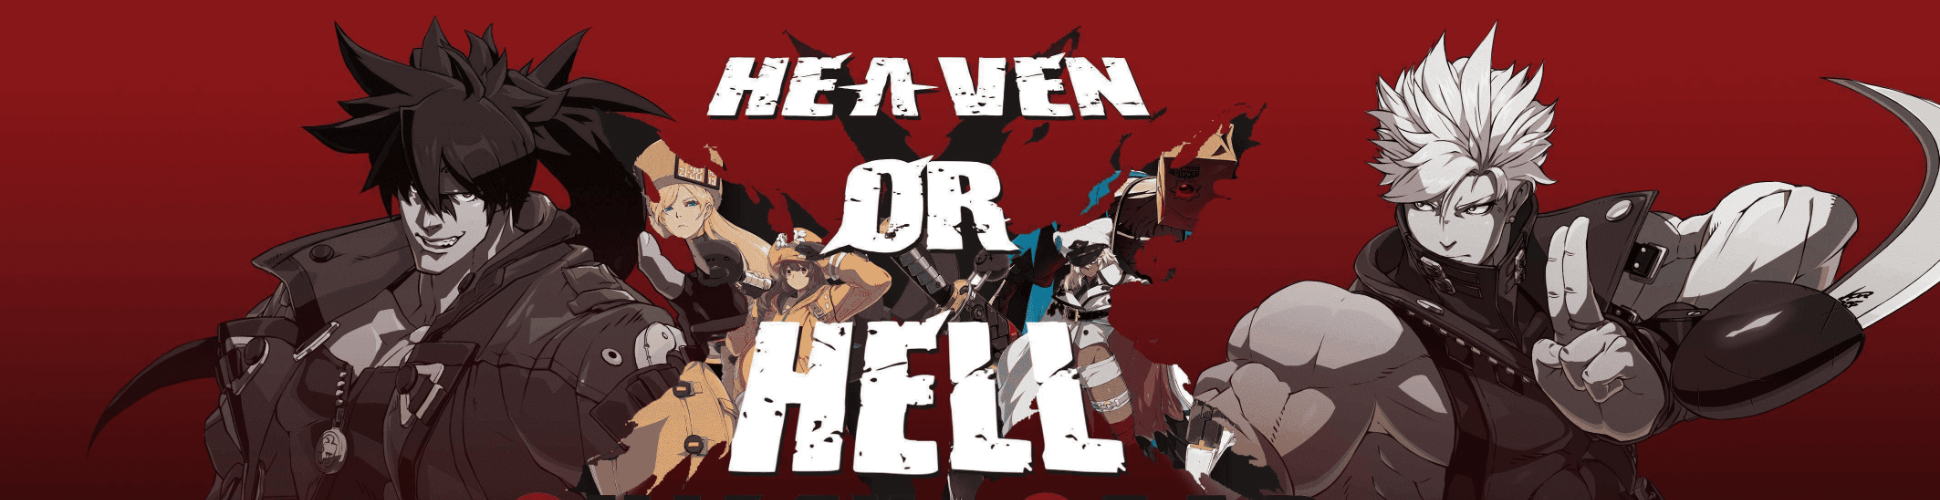 Heaven or Hell #52 (100 dollar prize pool)